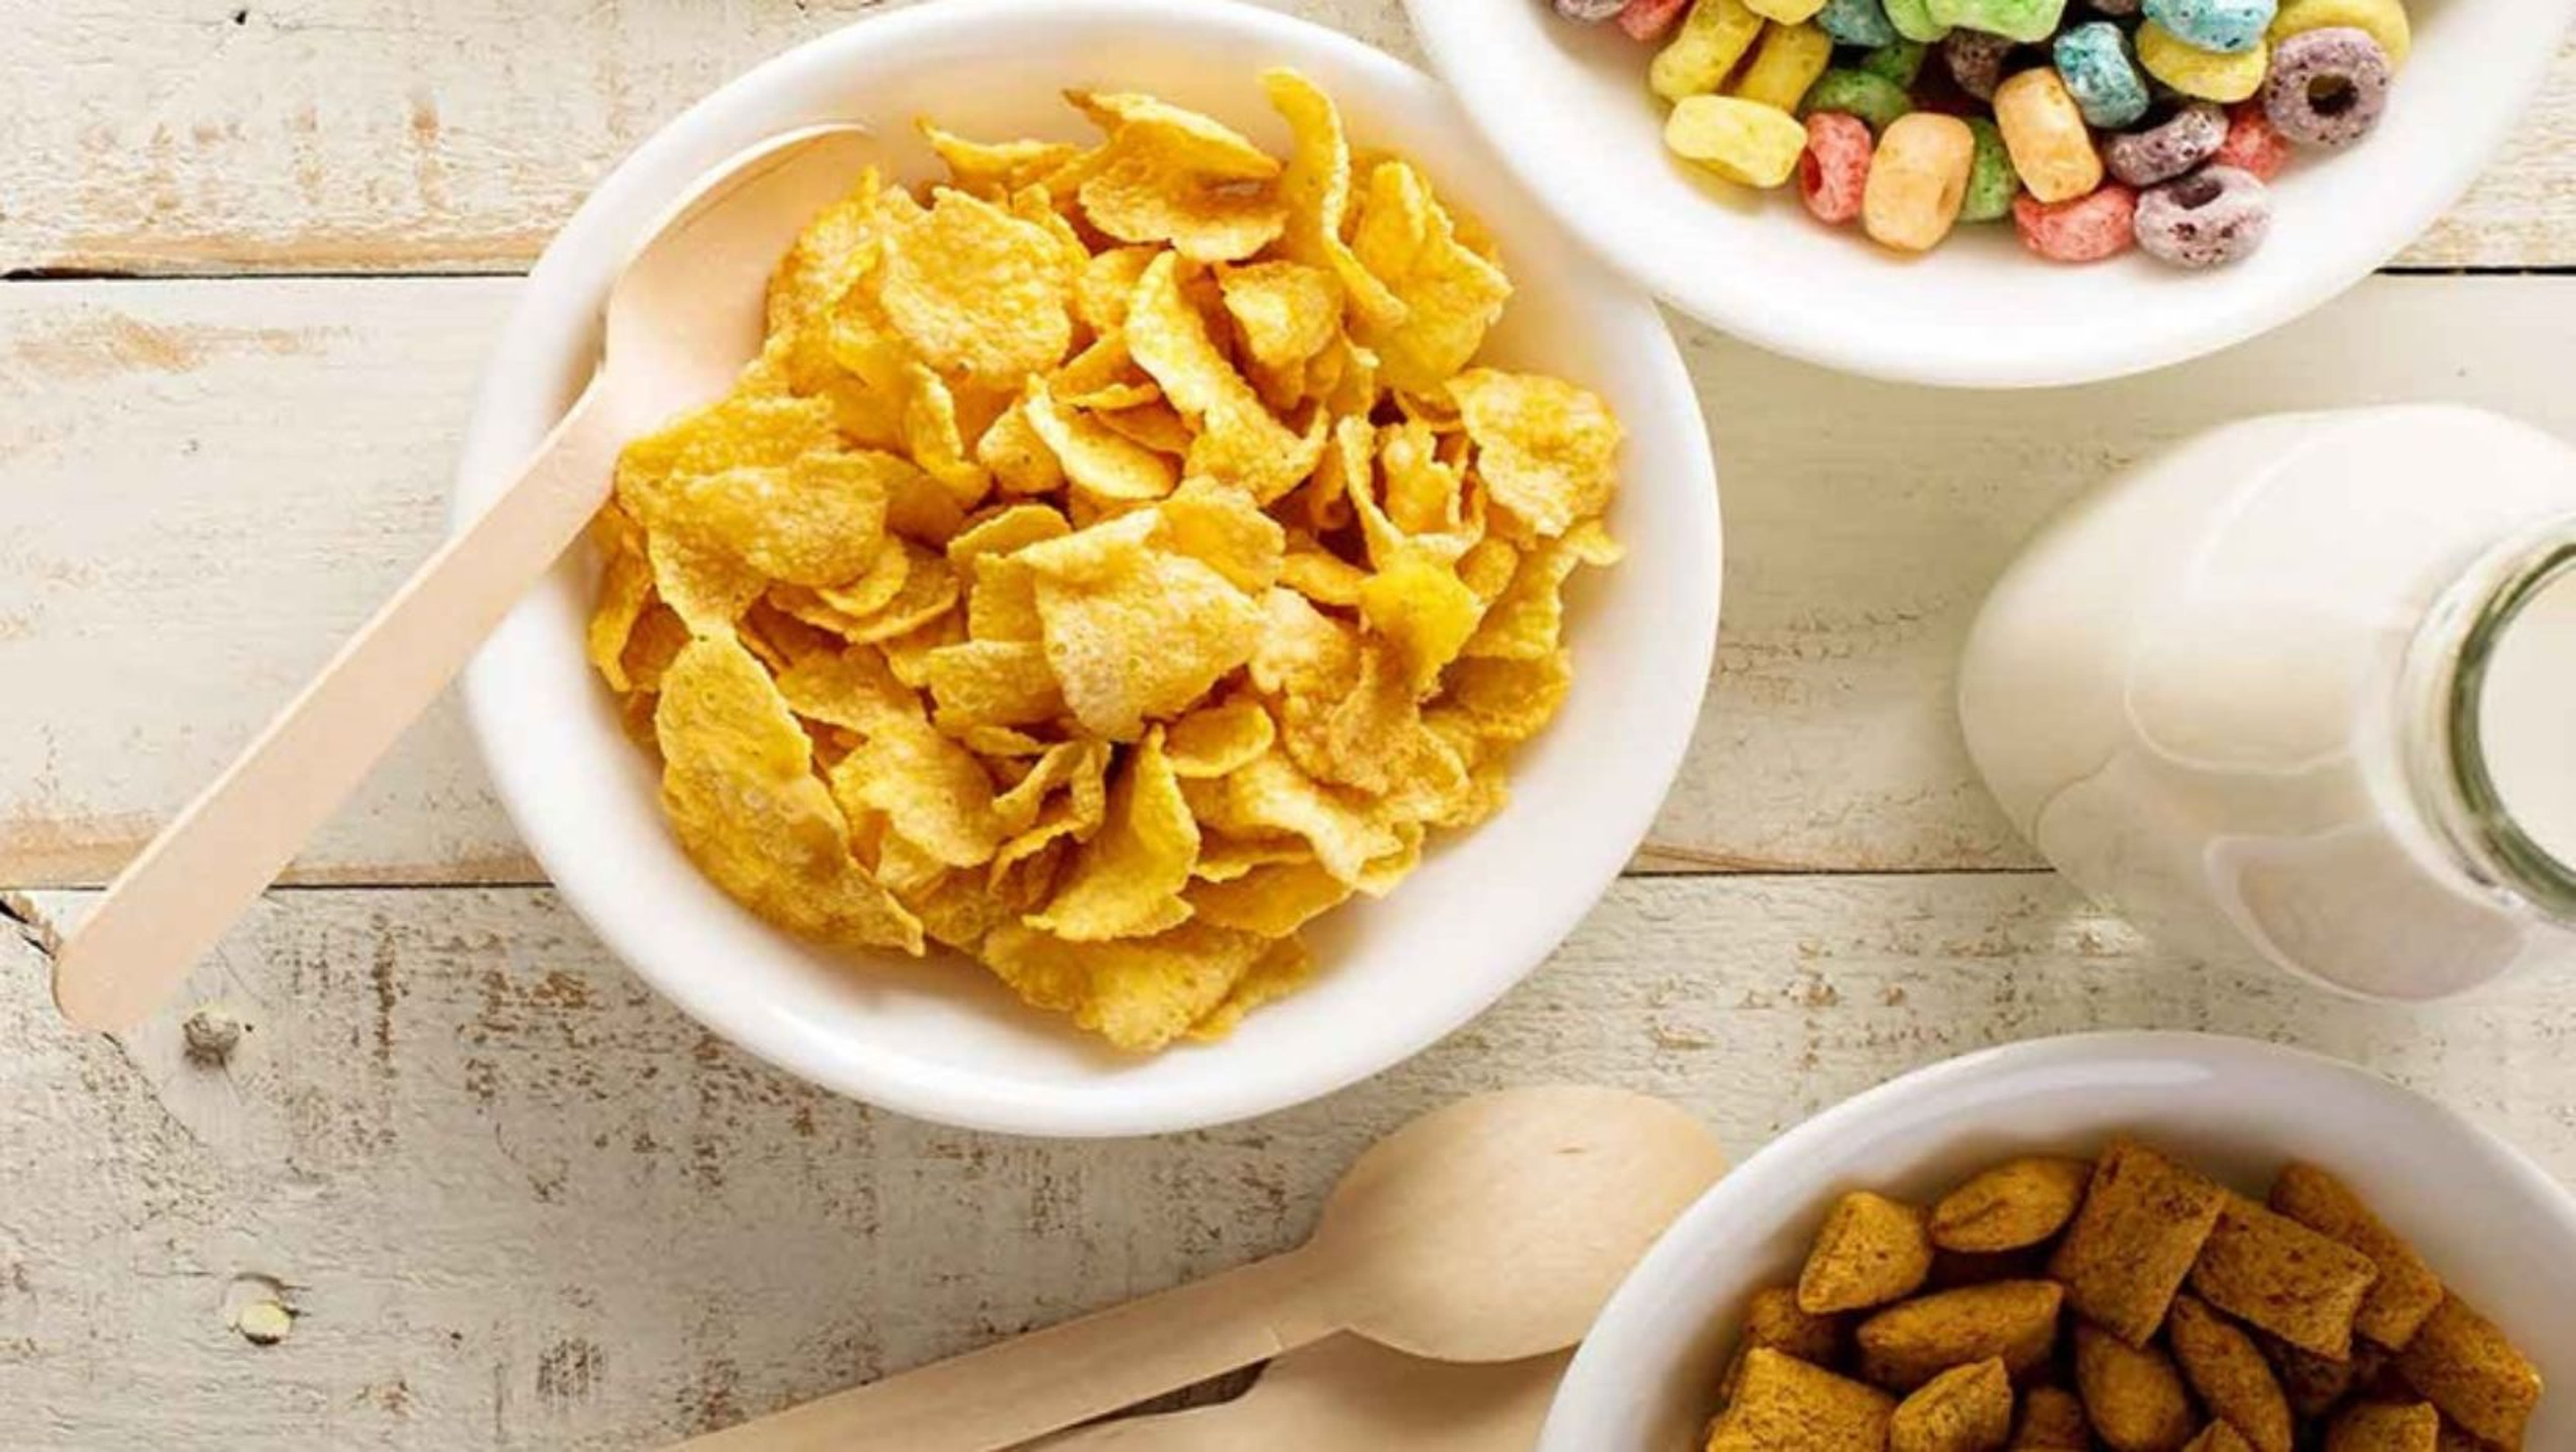 Cereal Brand Gets Soggy After Kellanova Spin-Off, Analyst Blames Headwinds On Debt